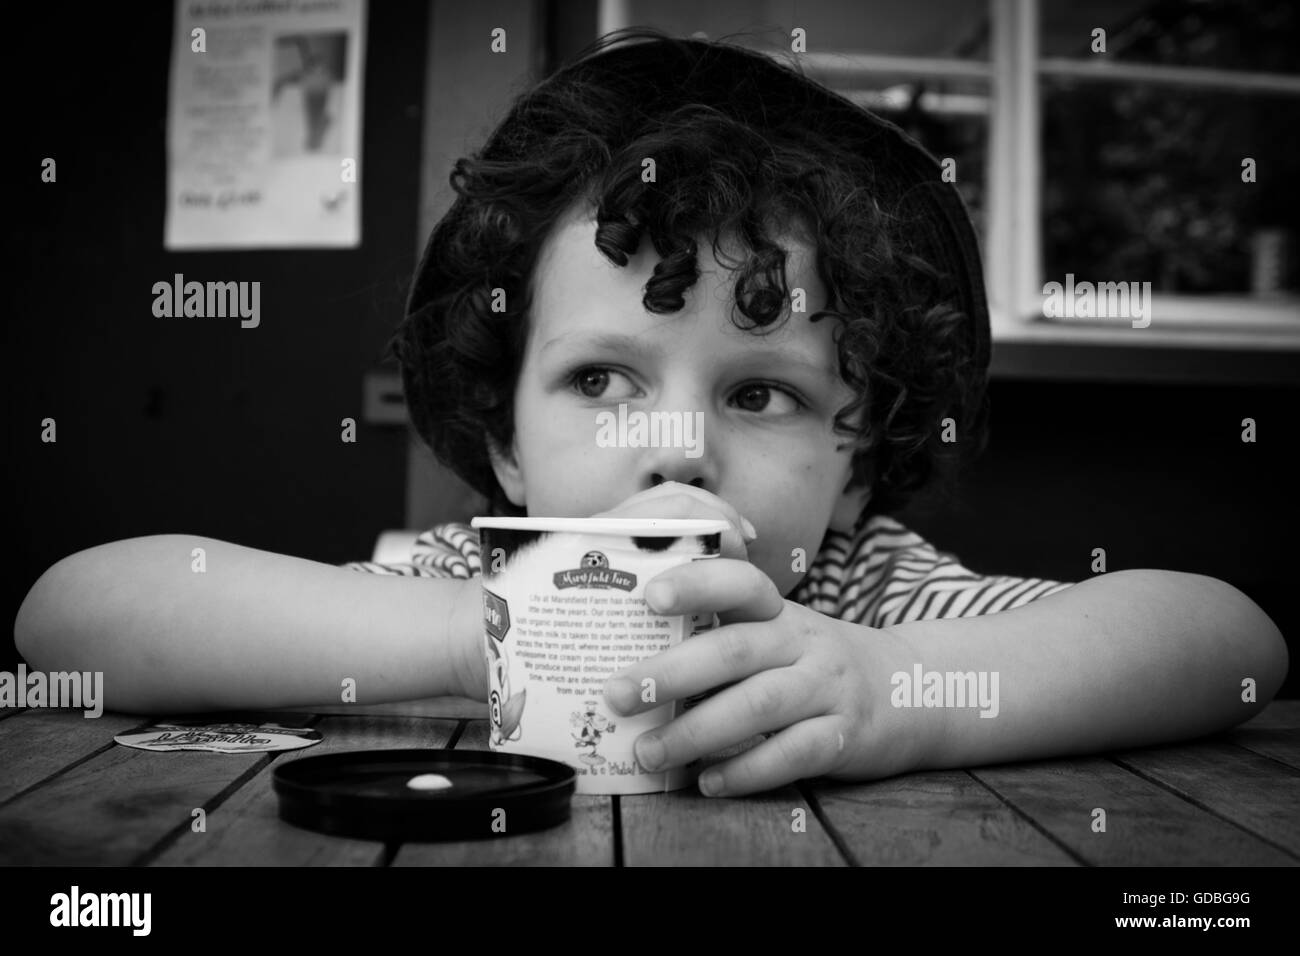 Young boy eating ice cream Banque D'Images